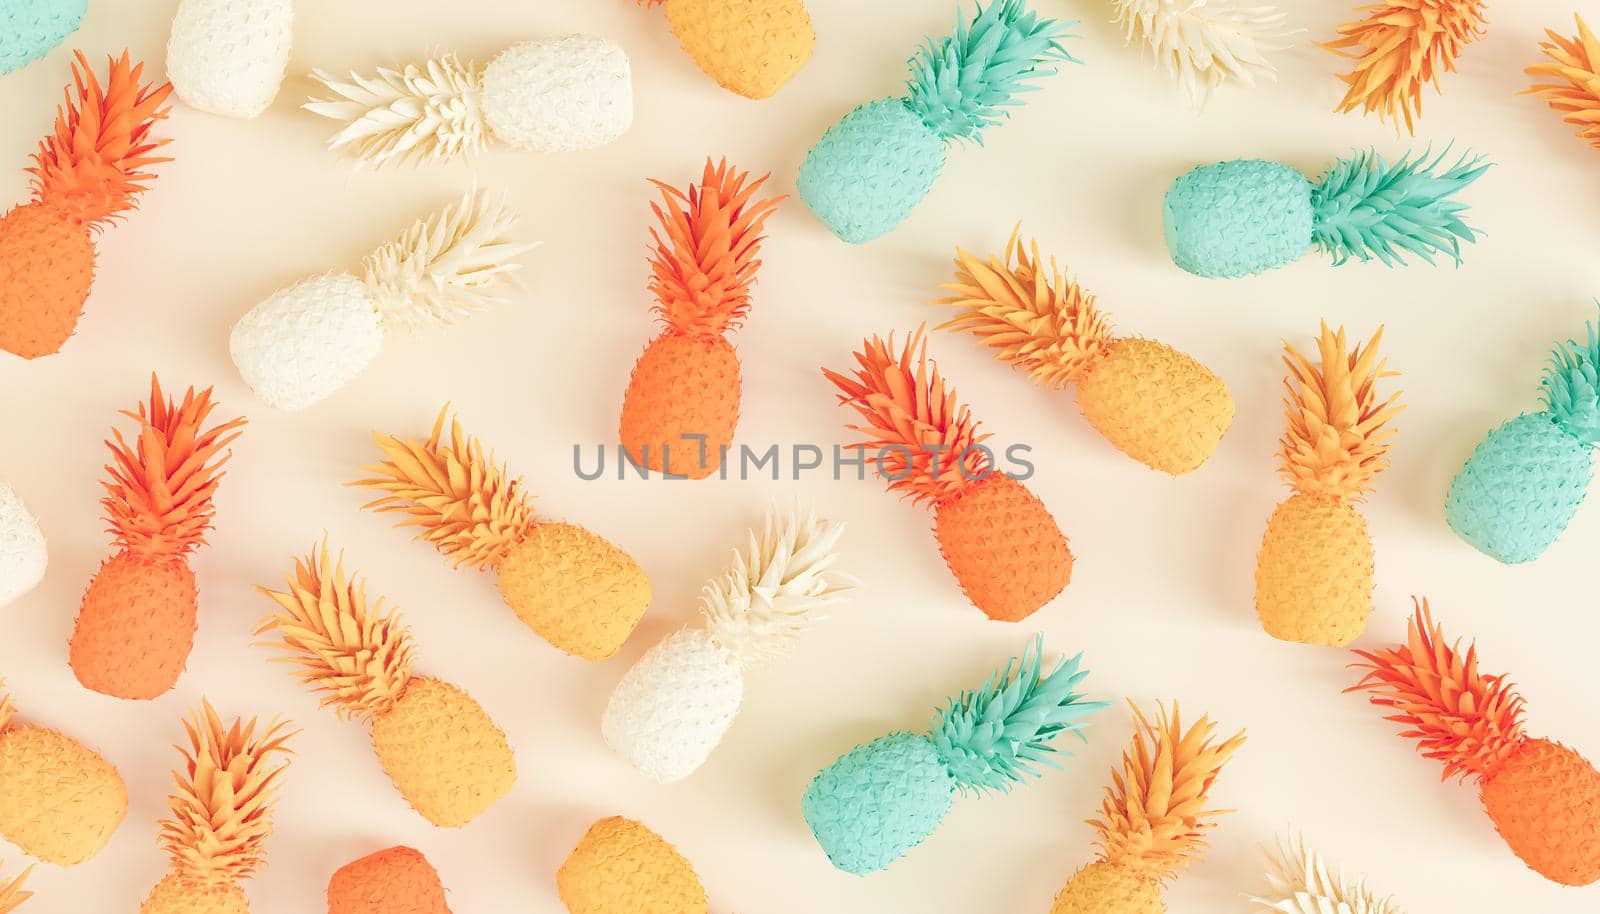 Top view of creative background with heap of bright pineapples with different colors placed on beige surface in light studio. 3d rendering